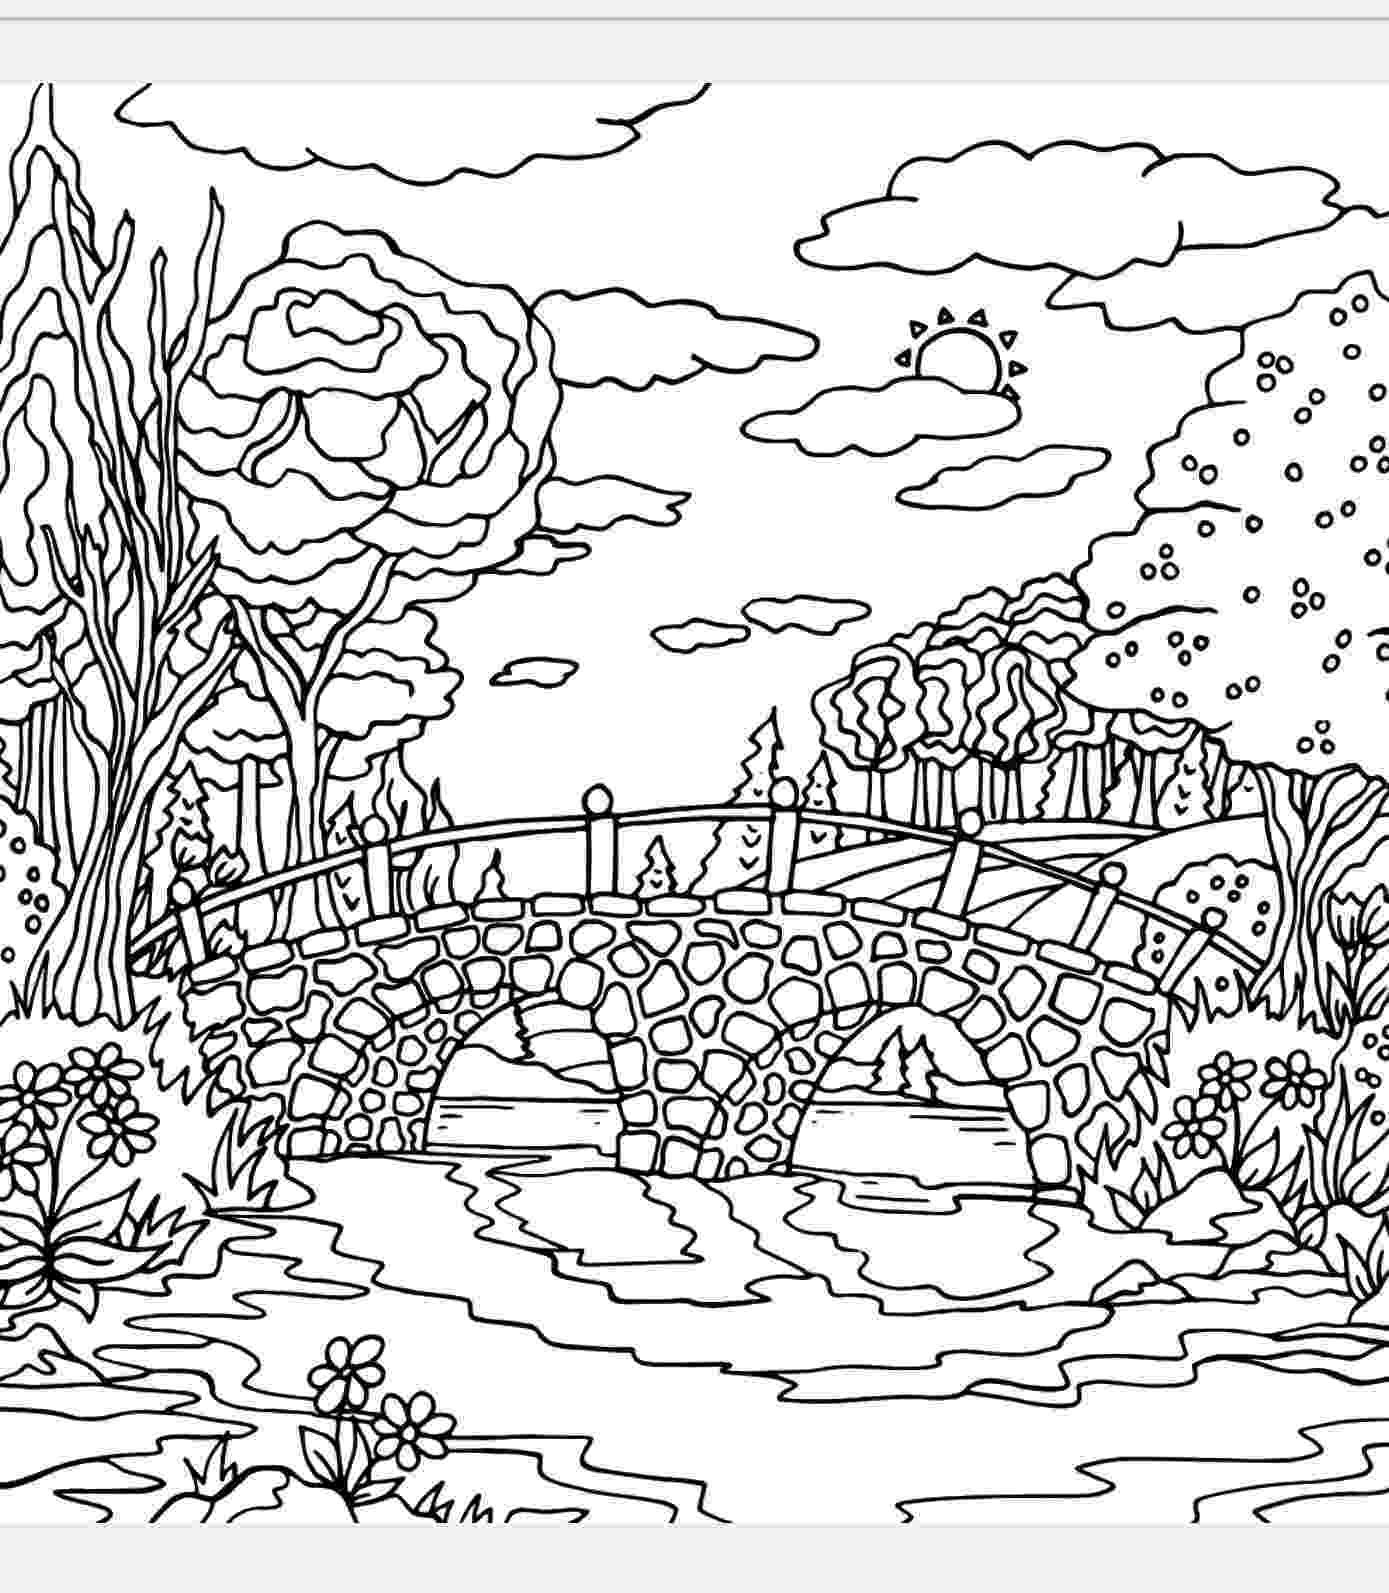 coloring book editor pin by erlene davis on adult coloring coloring pages editor coloring book 